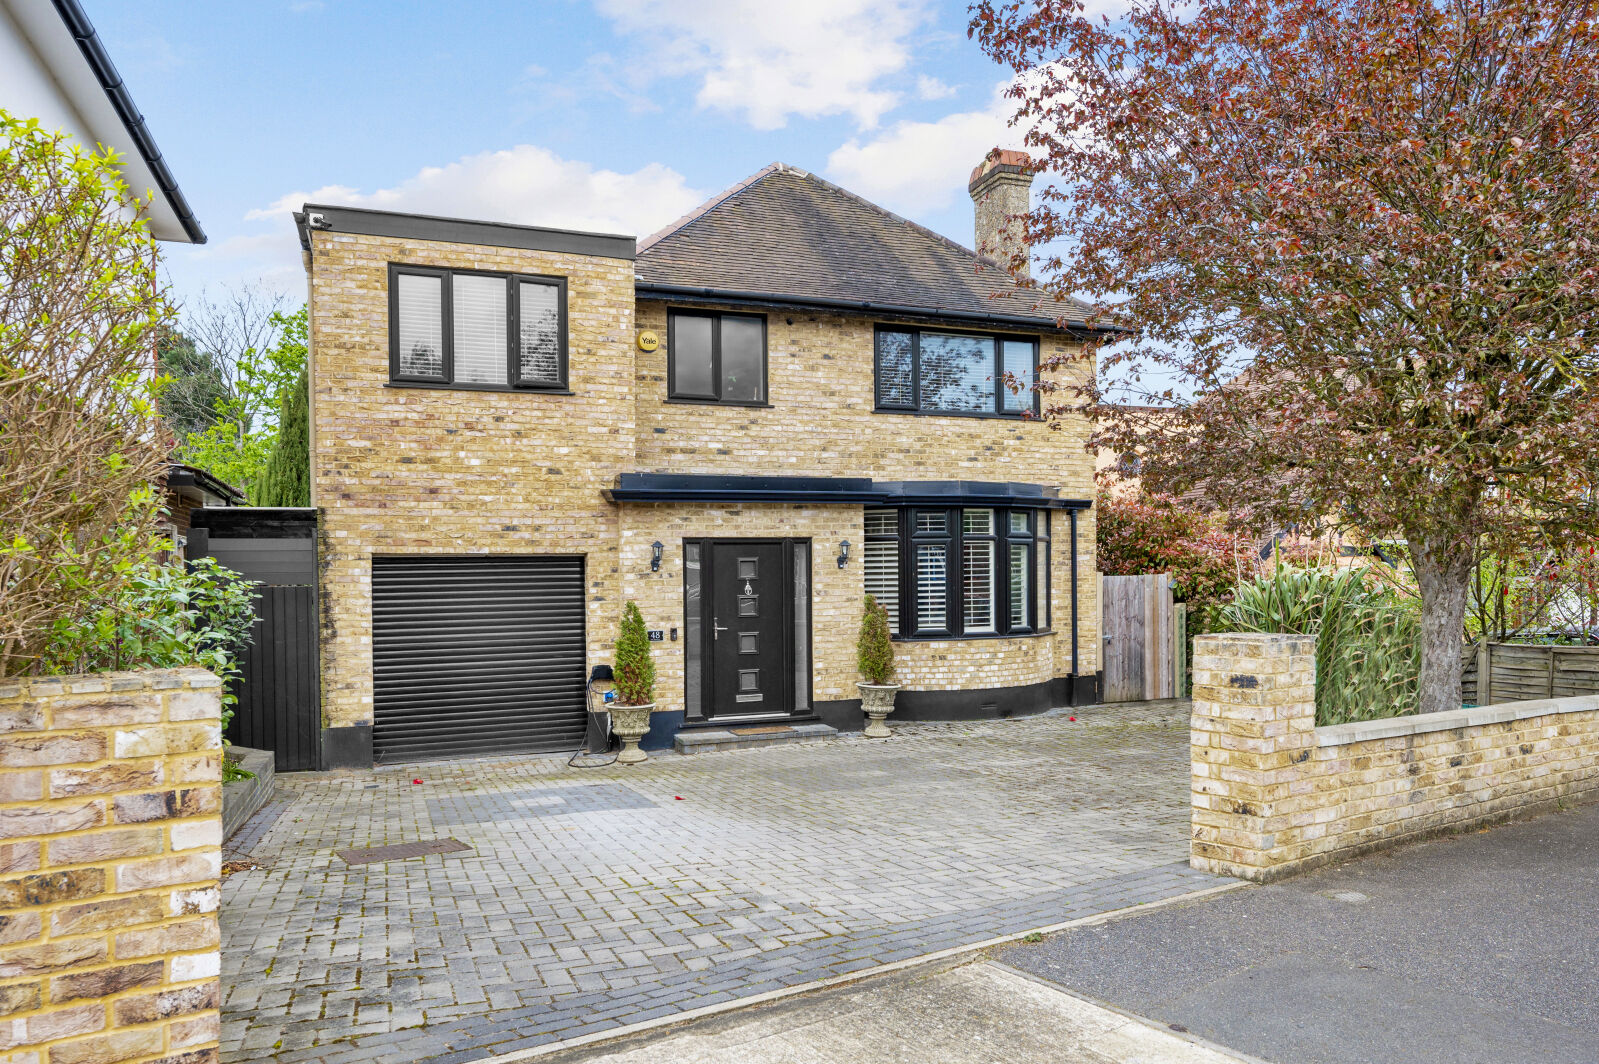 4 bedroom detached house for sale The Ridings, Surbiton, KT5, main image